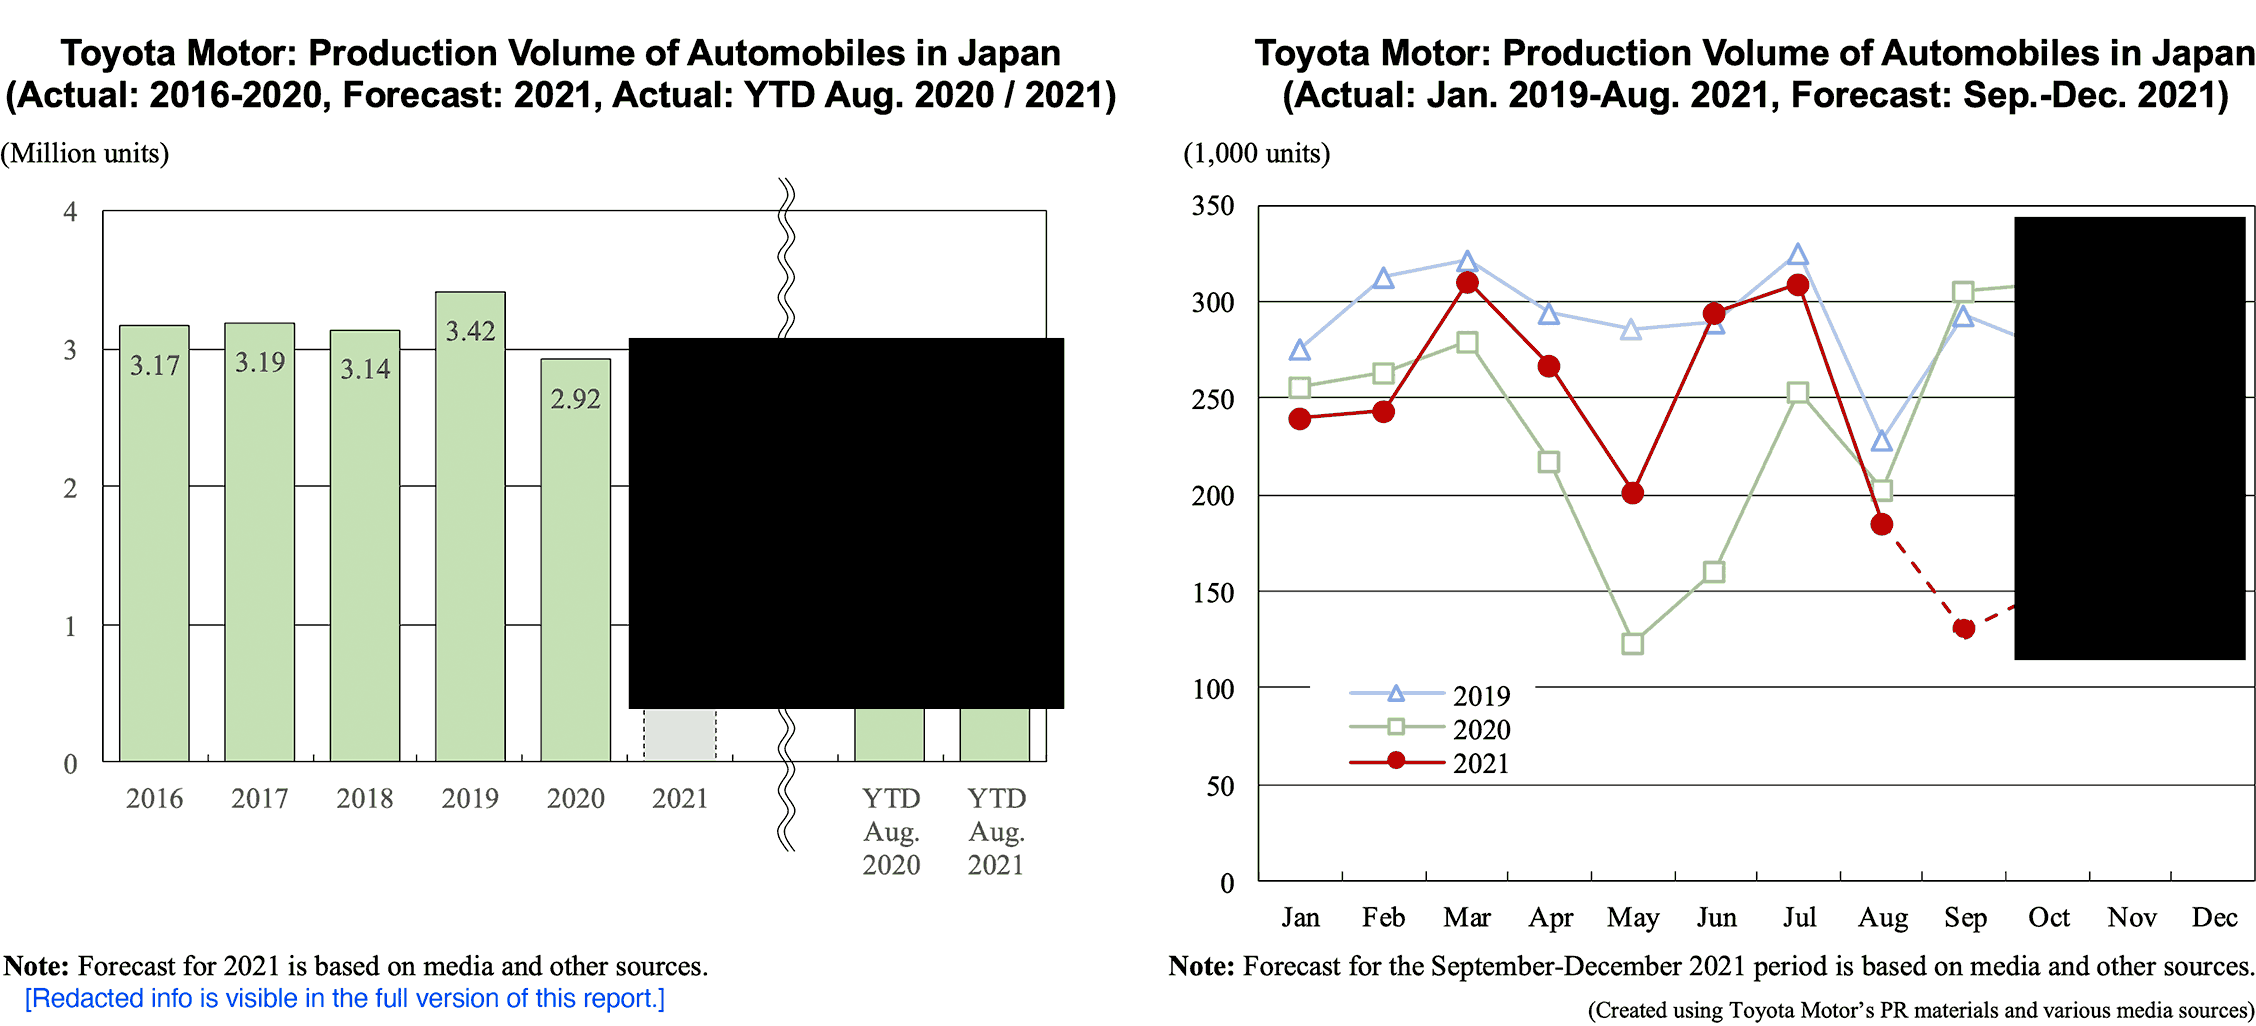 Toyota Motor: Production Volume of Automobiles in Japan (Actual: 2016-2020, Forecast: 2021, Actual: YTD Aug. 2020 / 2021) | Toyota Motor: Production Volume of Automobiles in Japan (Actual: Jan. 2019-Aug. 2021, Forecast: Sep.-Dec. 2021)